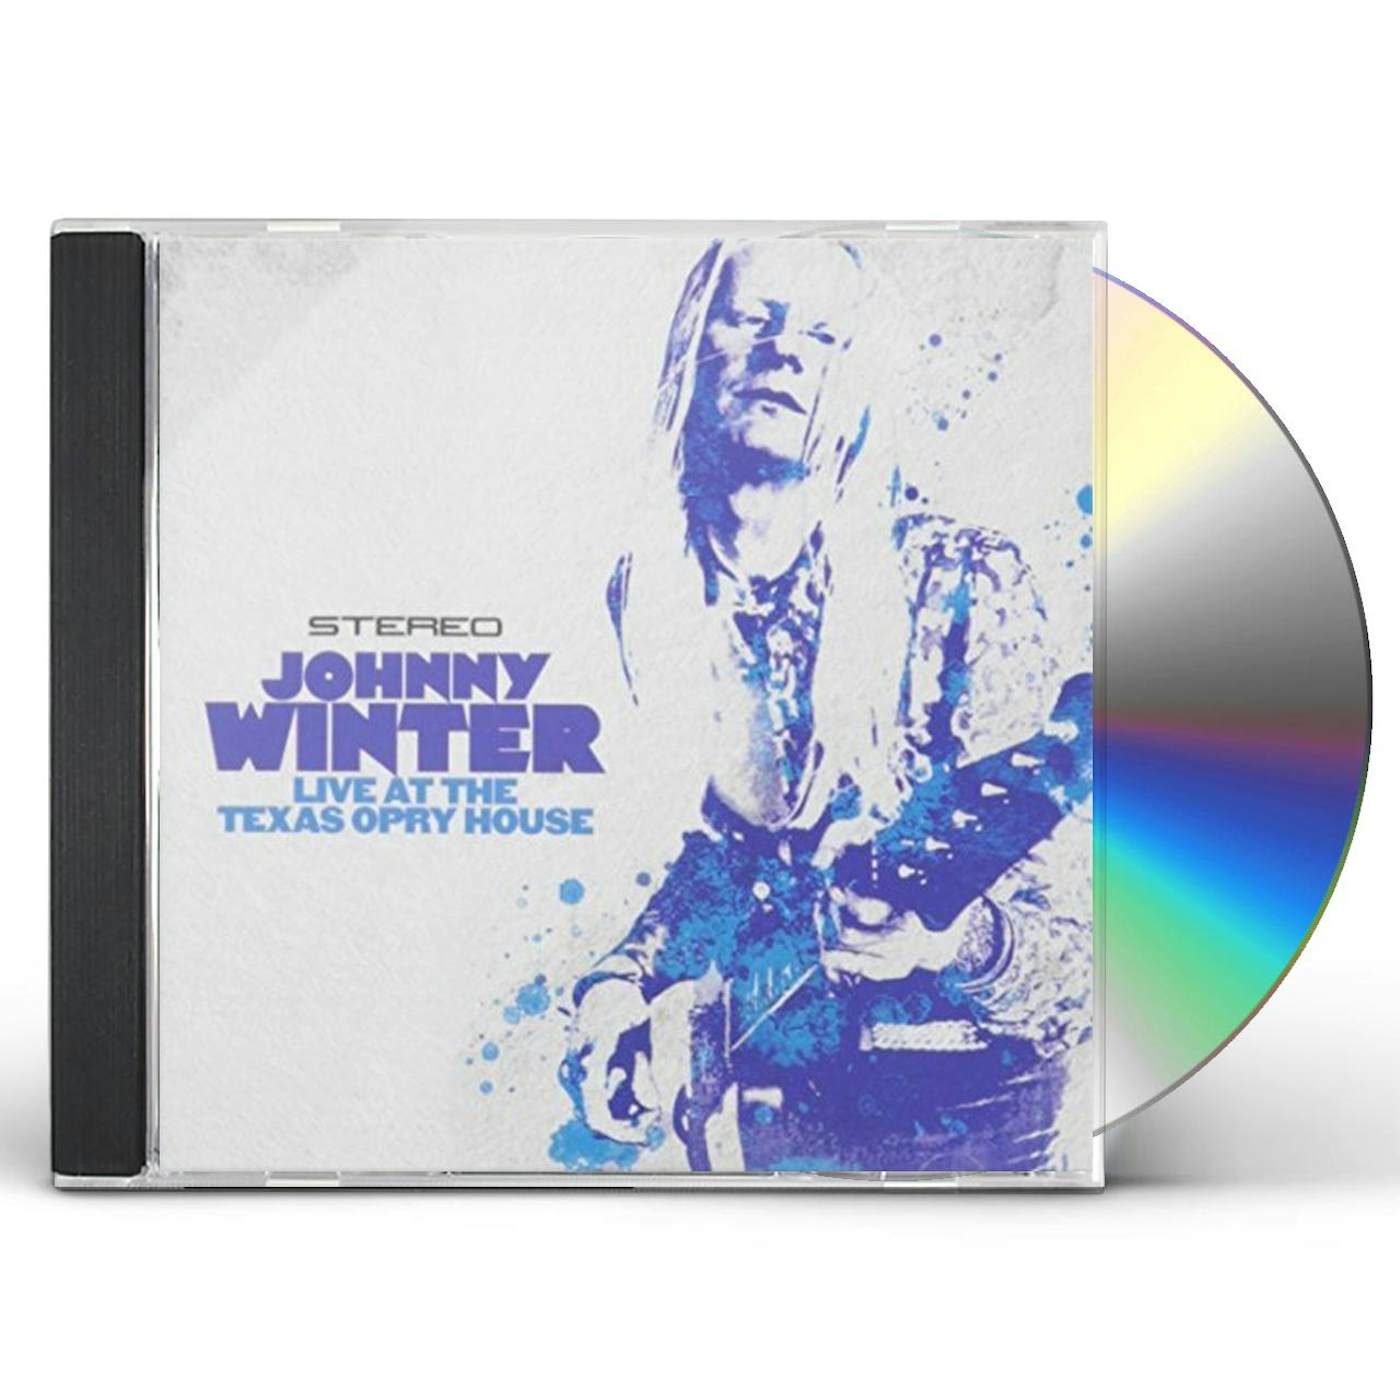 Johnny Winter LIVE AT THE TEXAS OPRY HOUSE CD